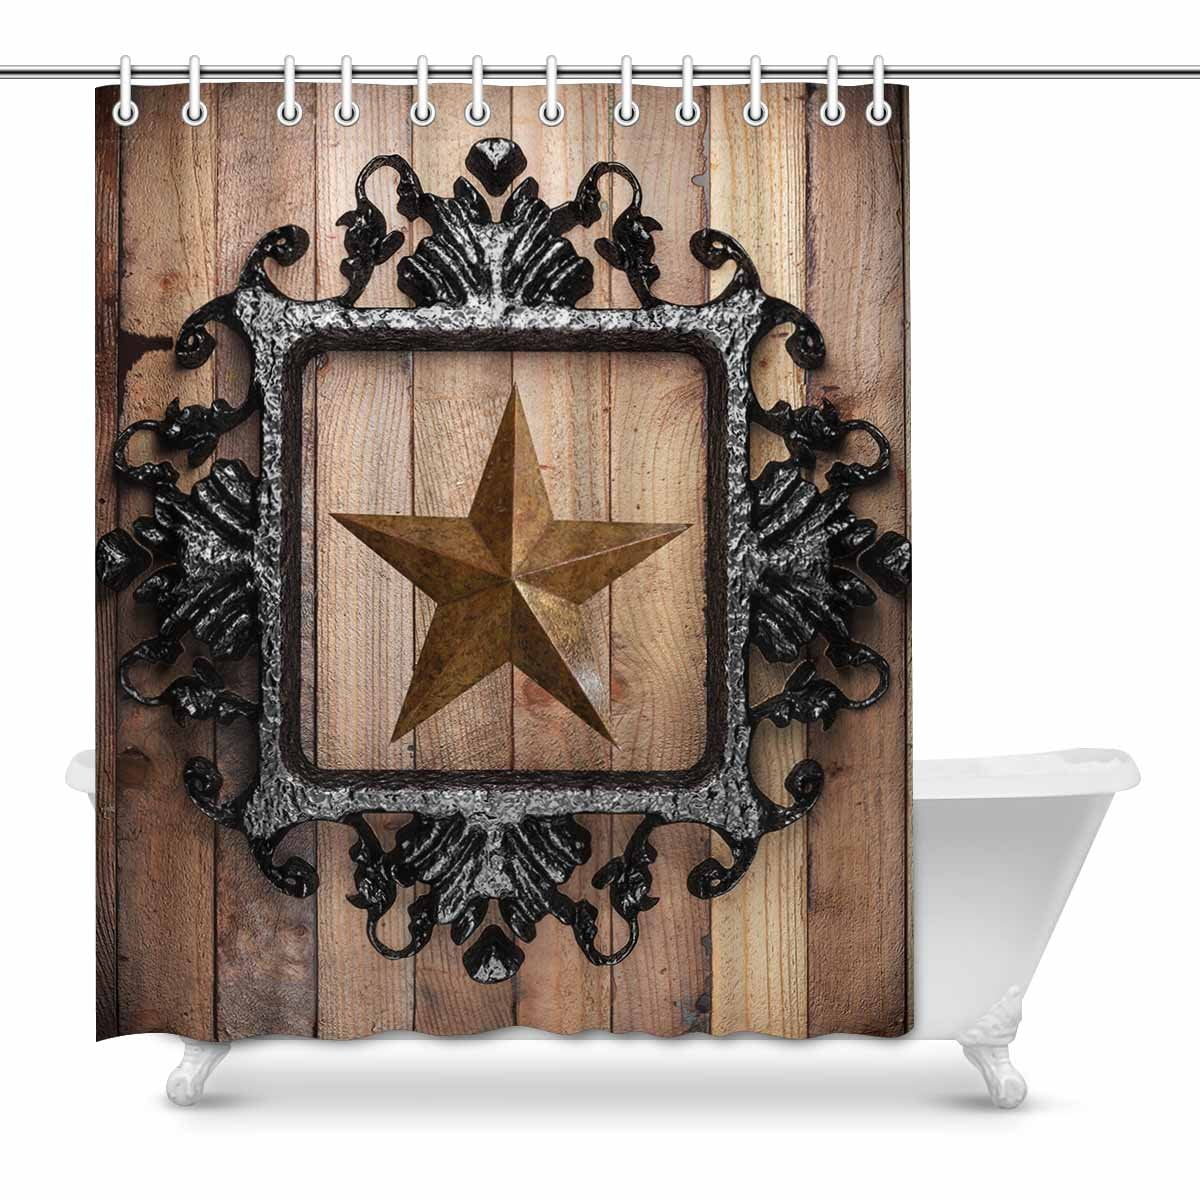 Cowboy with Noose Shower Curtain Complete Bathroom Set Waterproof Polyester 